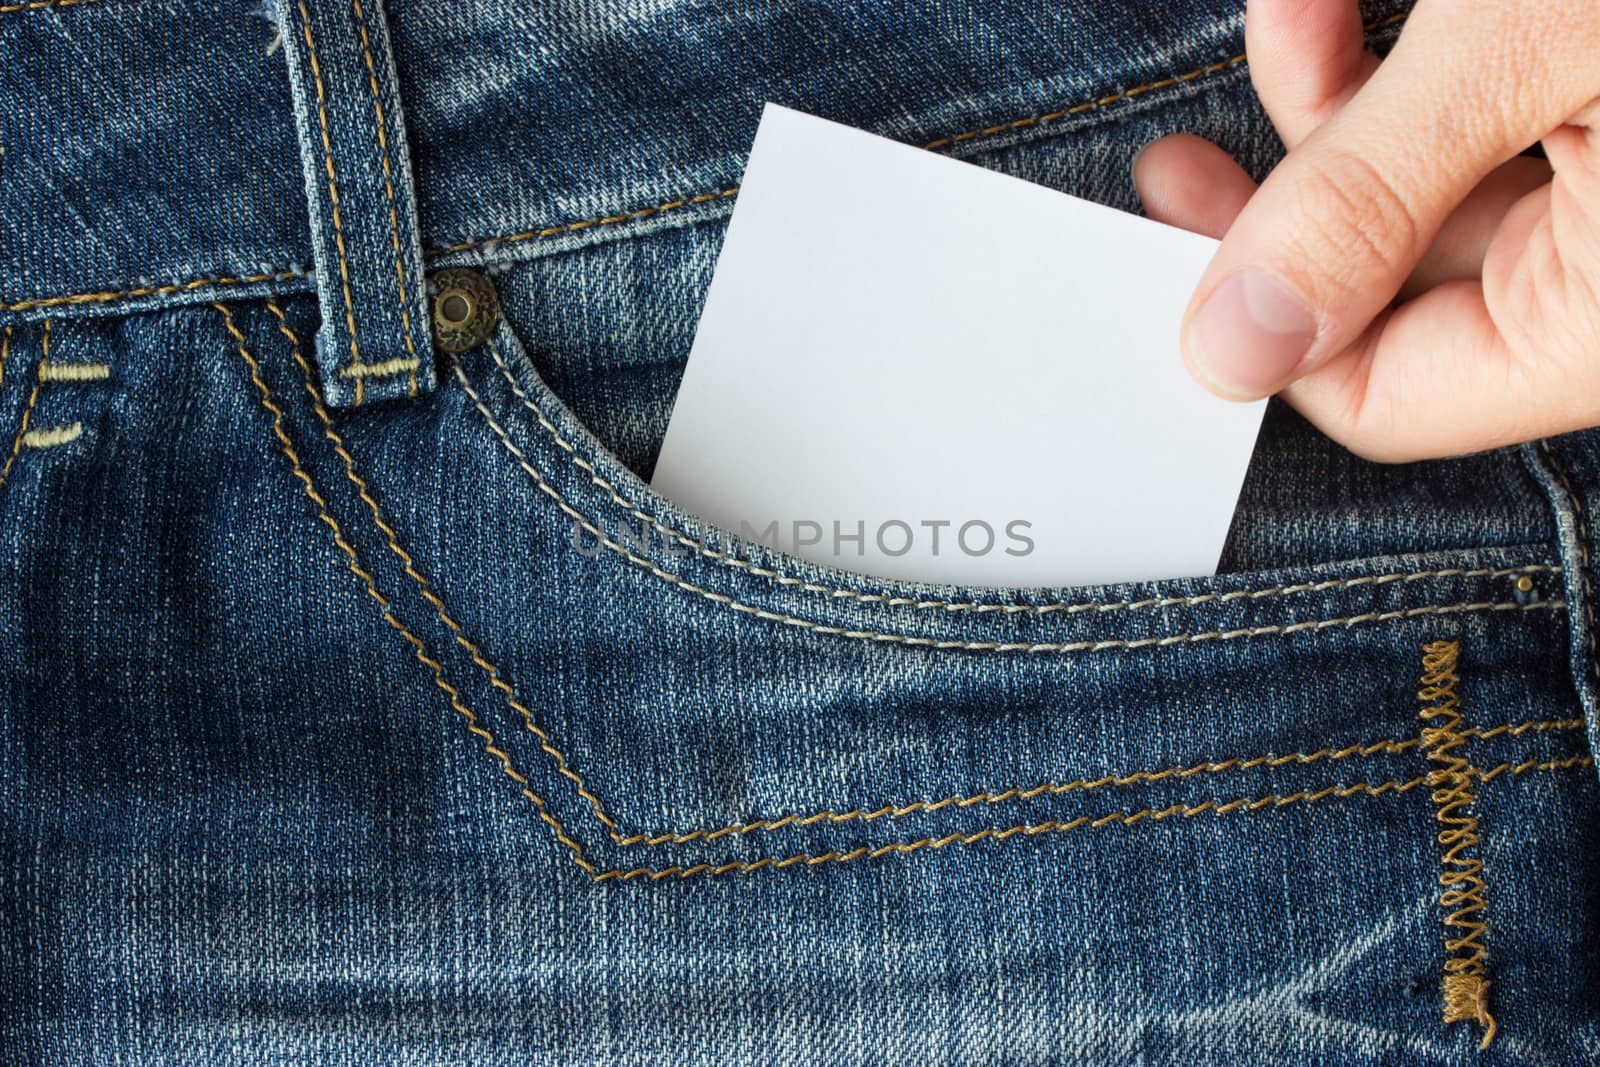 Piece of paper in blue jeans pocket